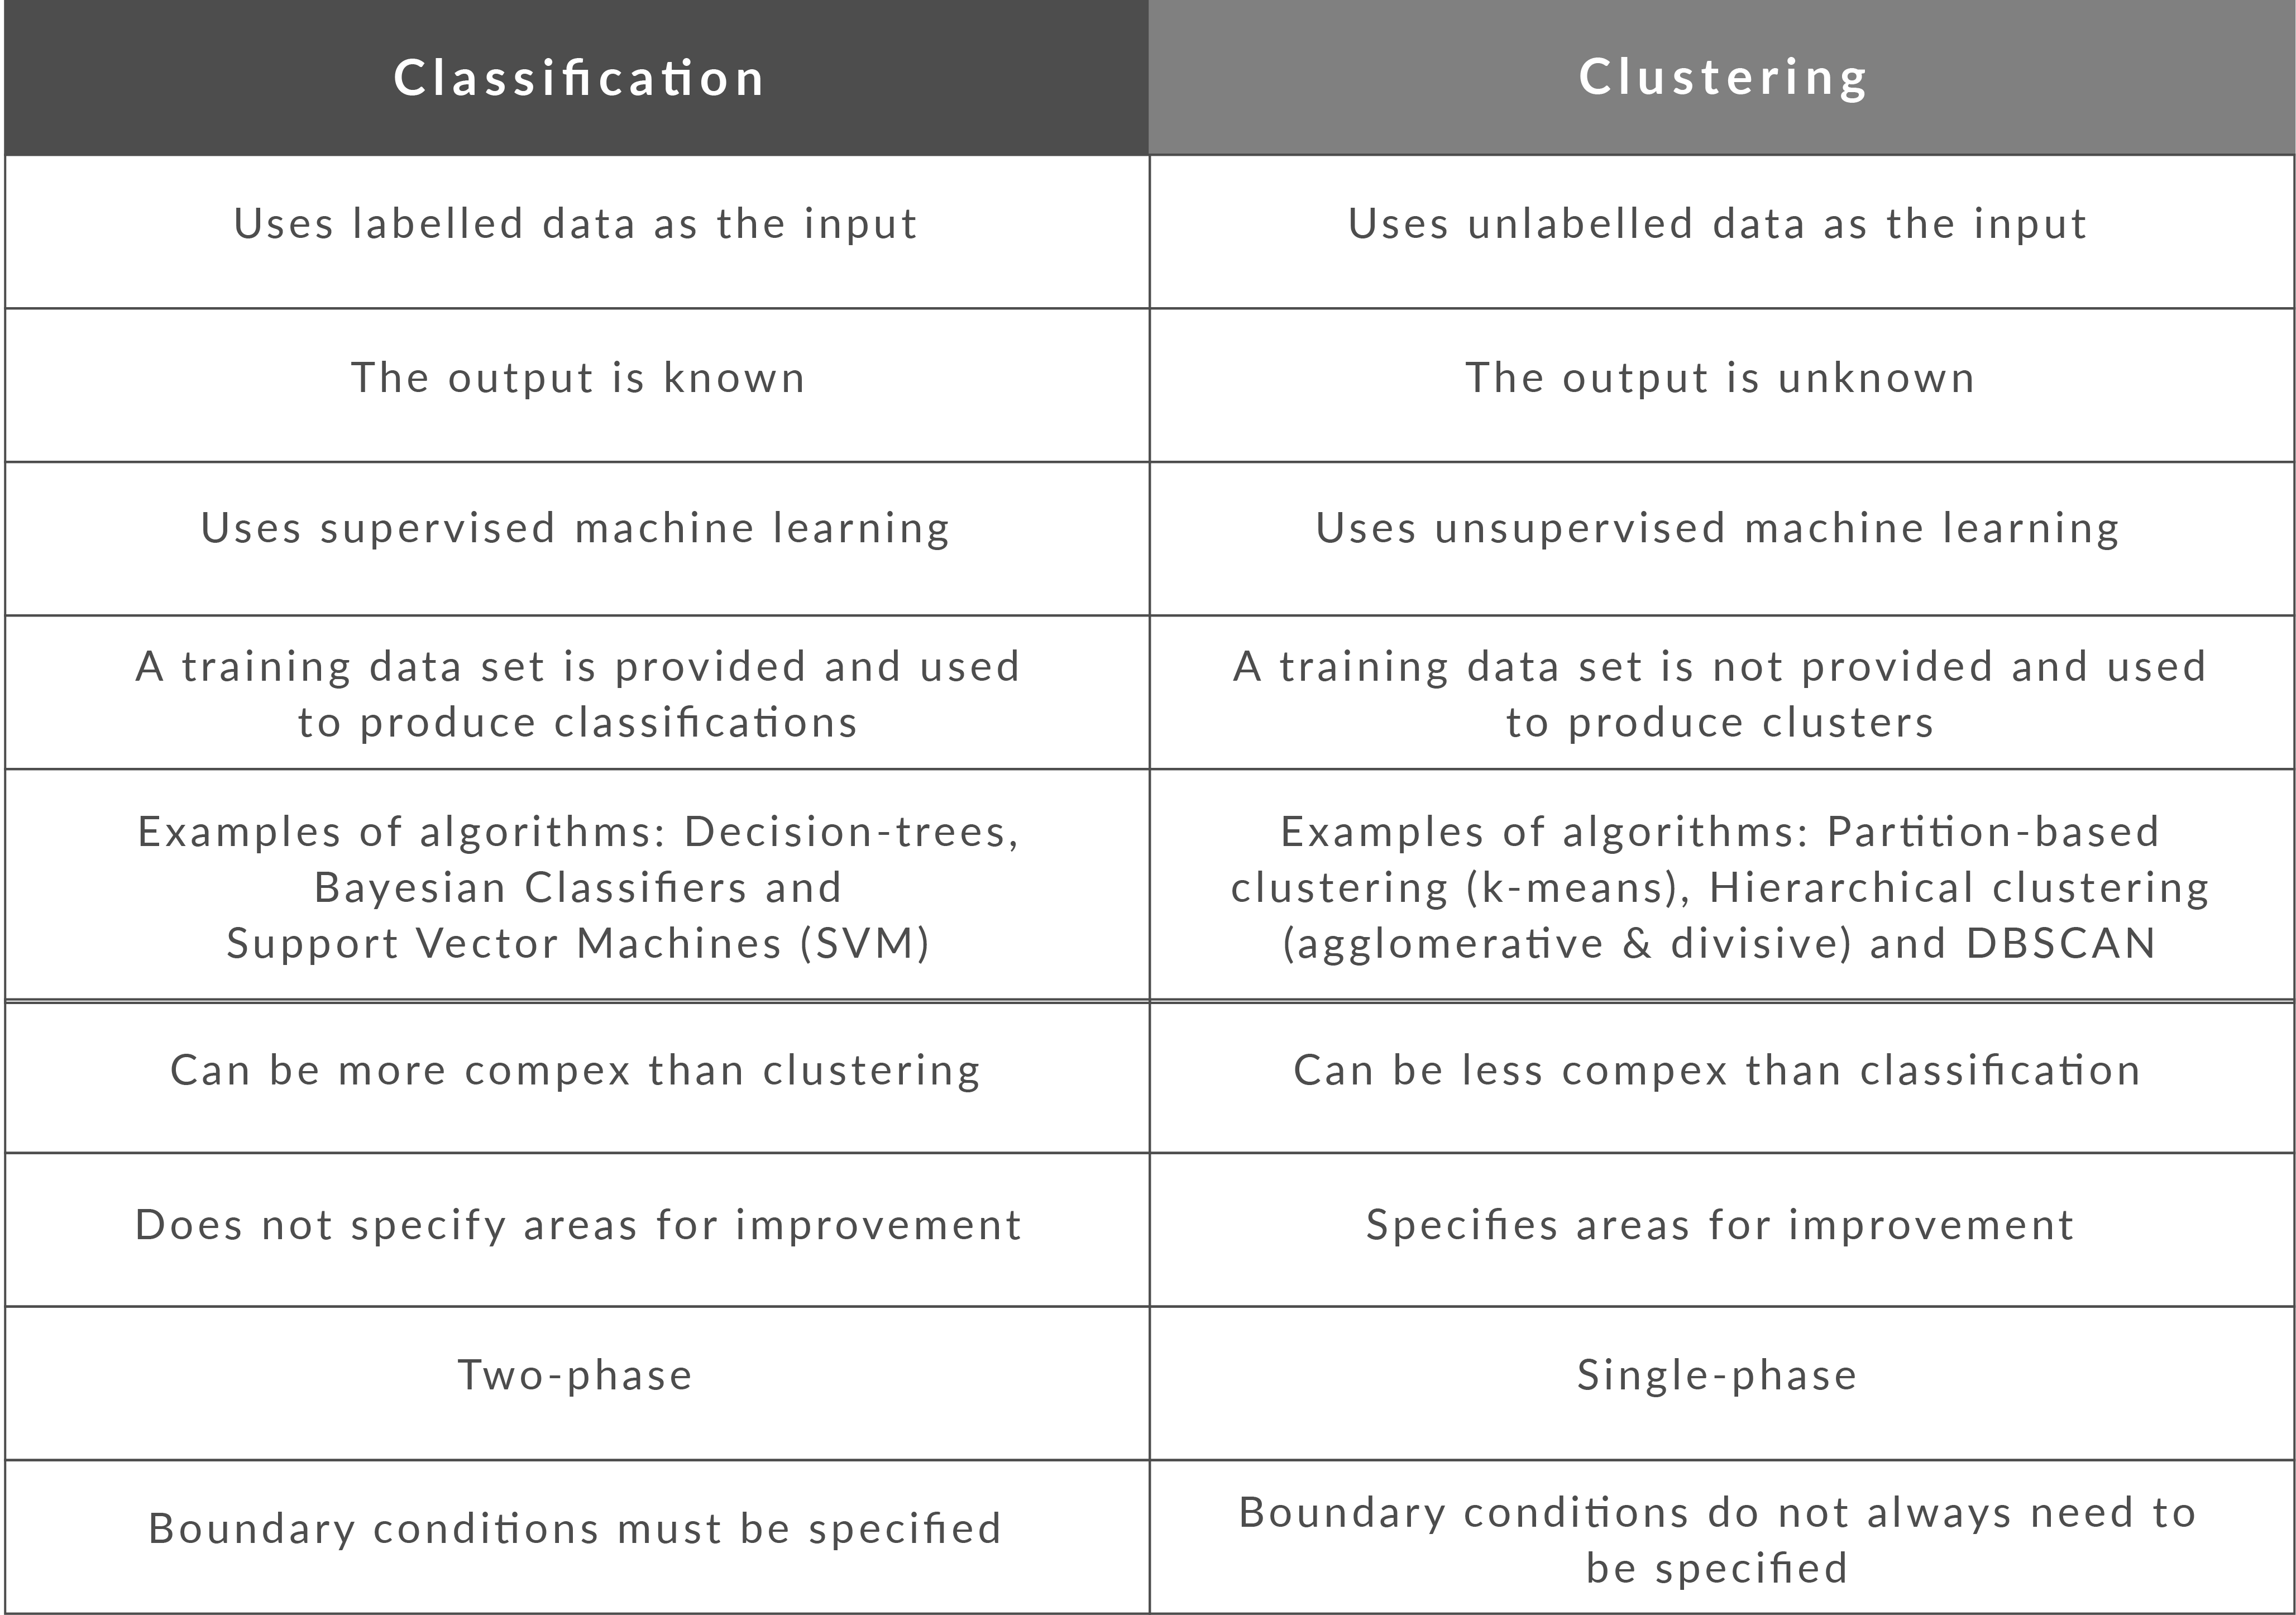 What is the difference between classifier and classification?